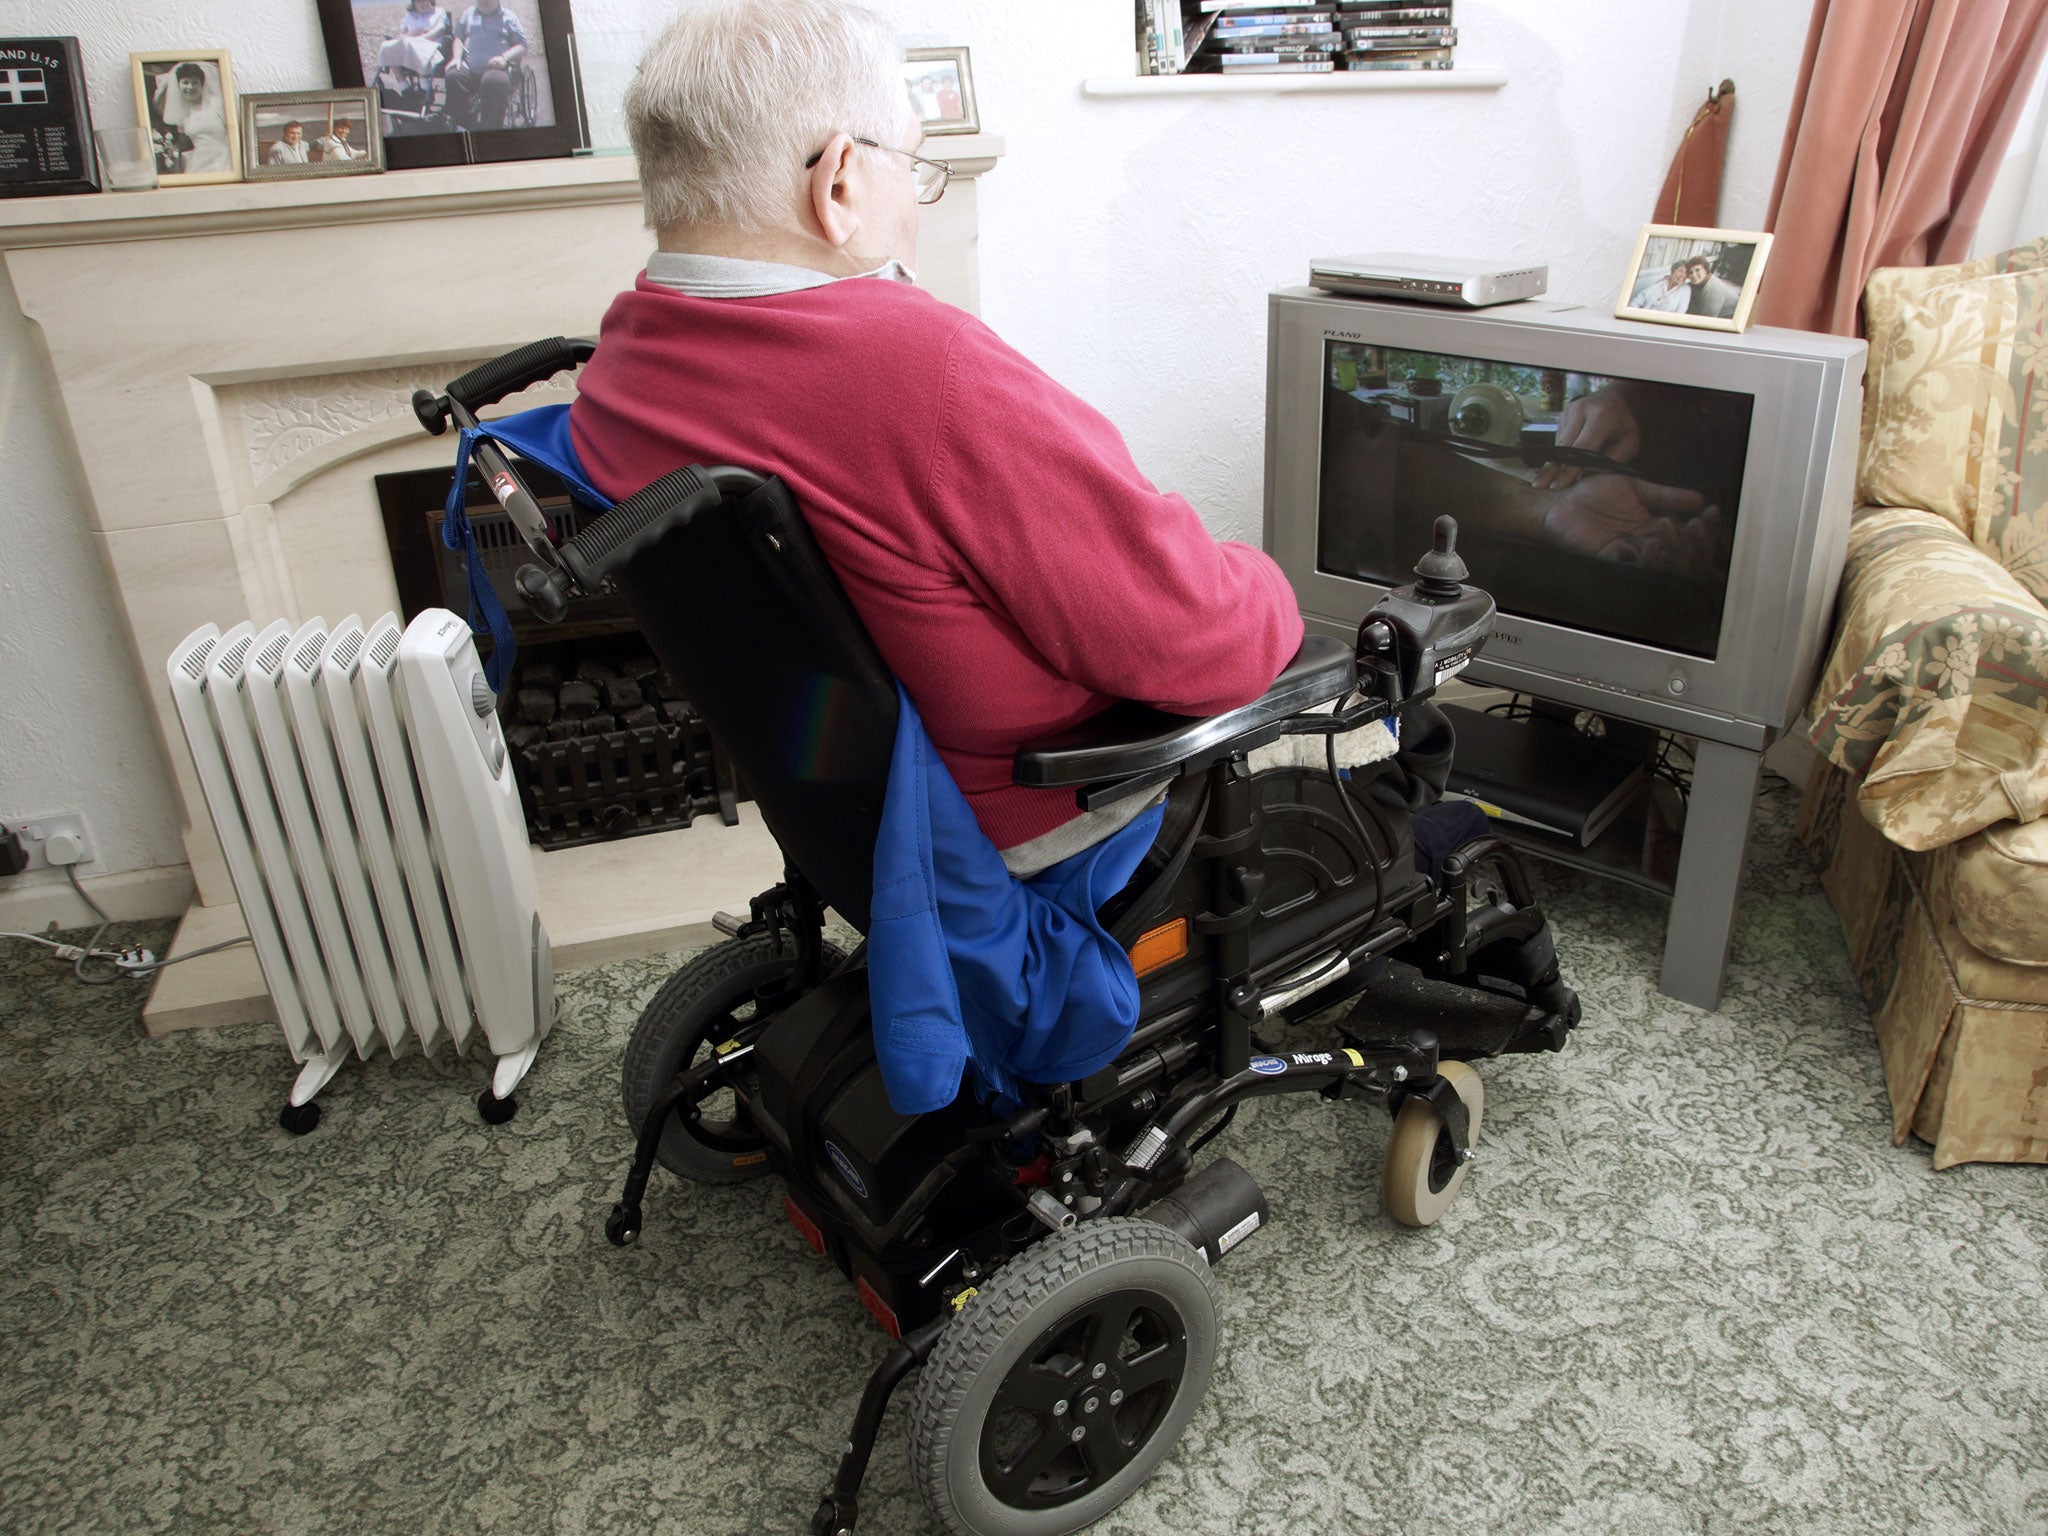 Disabled people are being left stranded in their own homes due to a 'culture of law- breaking' within local government over obligations to adapt homes and make them more accessible